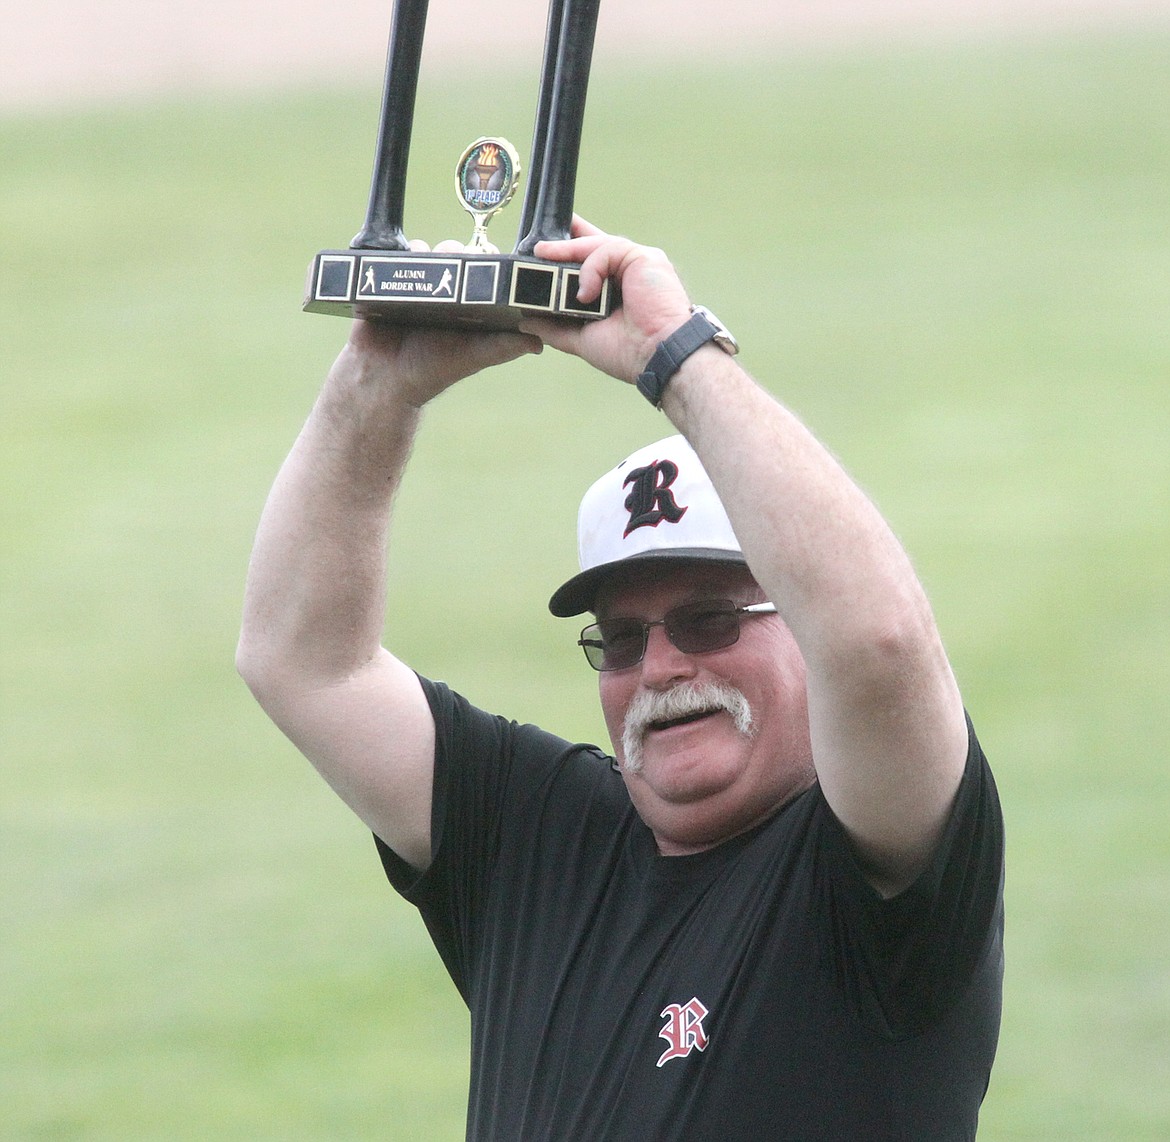 Strathmore Reds Alumni Coach Darwin Armitage displays the 2019 Alumni Border War trophy after the Reds defeated the Logger Alumni  16-14 Saturday. (Paul Sievers/The Western News)